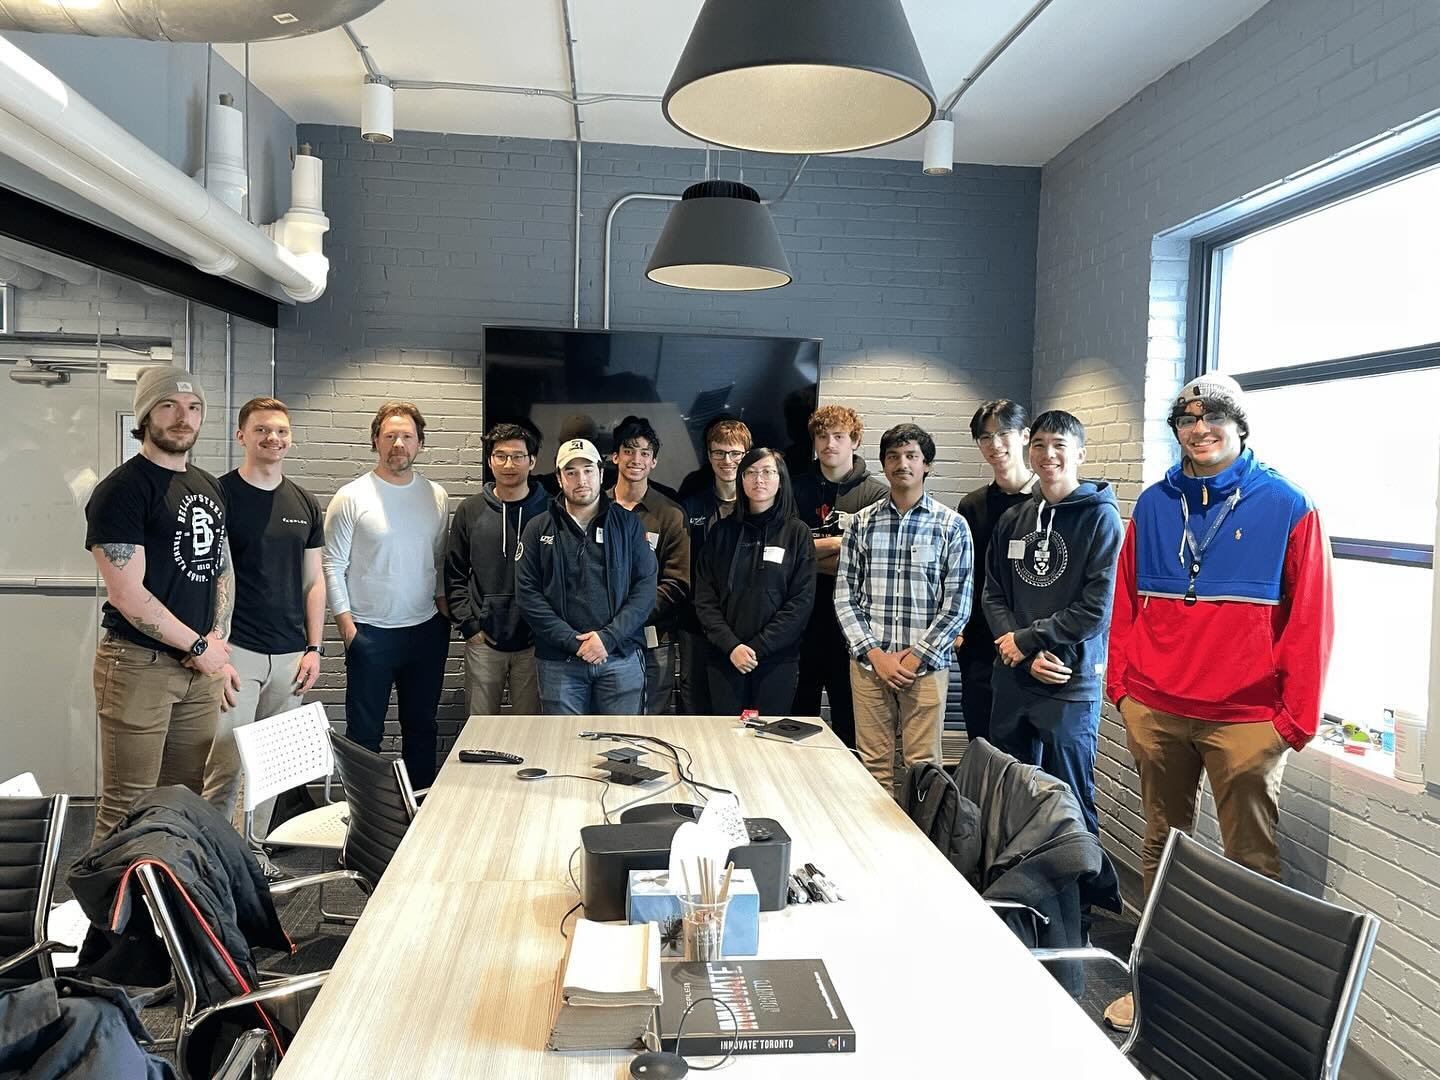 On April 2nd, the UTAT Rocketry RF team got the chance to visit Kepler Communications (@keplercomms). While there, our team was able to discuss and receive feedback on the RF system architecture for our liquid rocket project! 

It was great to be abl